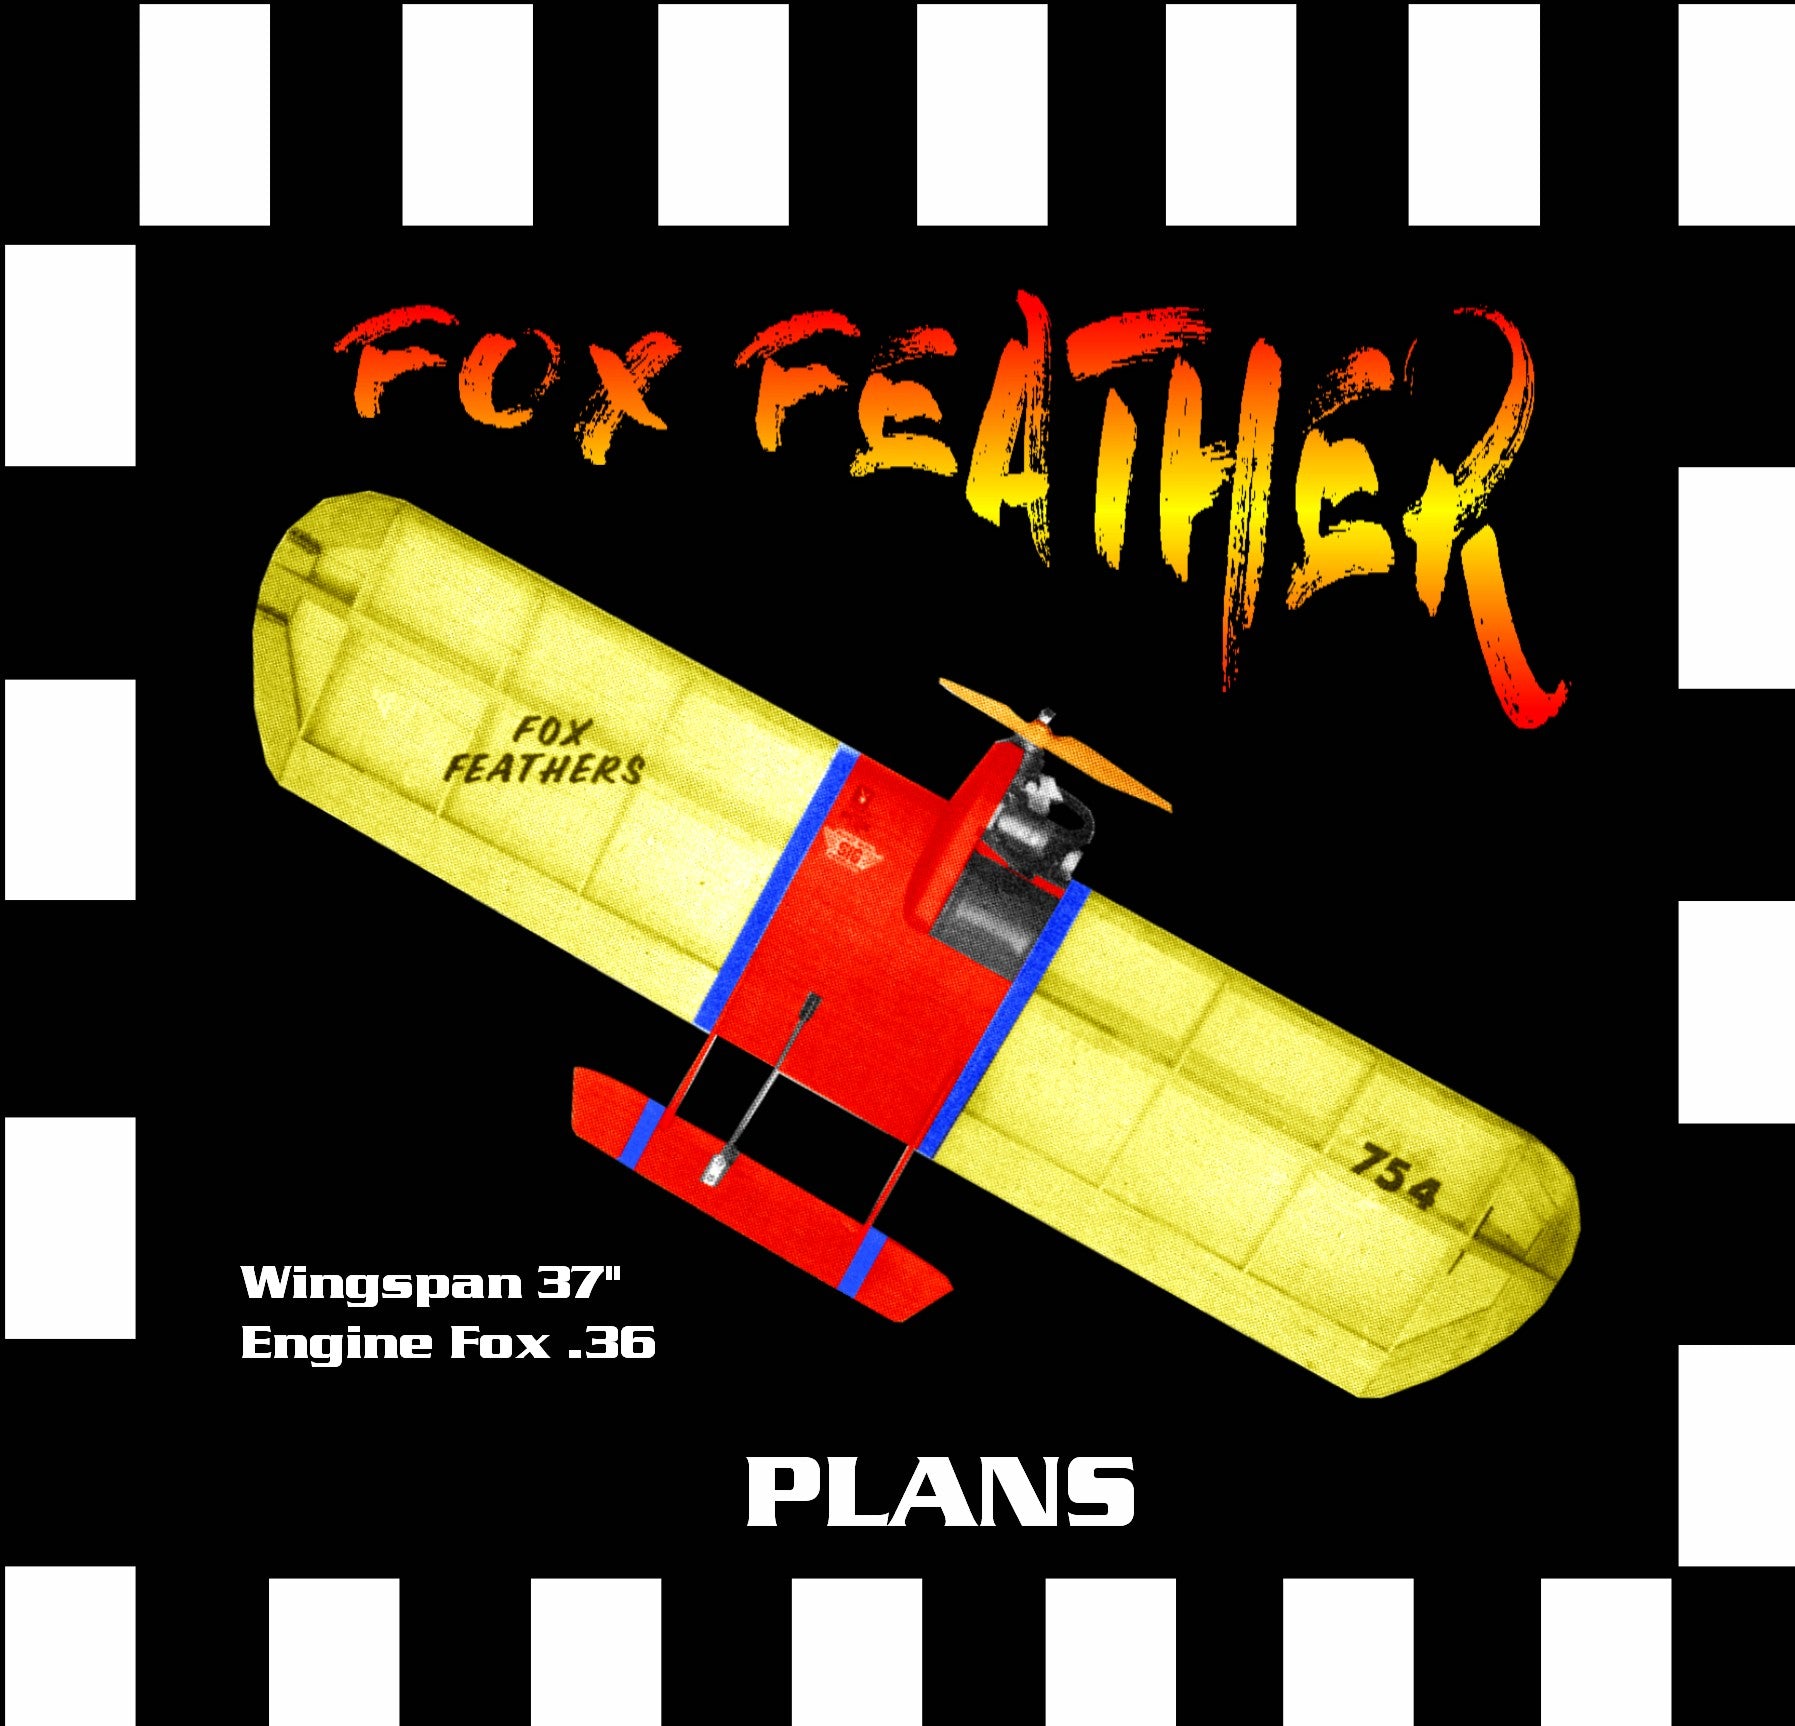 full size printed plan & building notes diamond airfoil combat *fox feather* wingspan 37"  engine fox .36